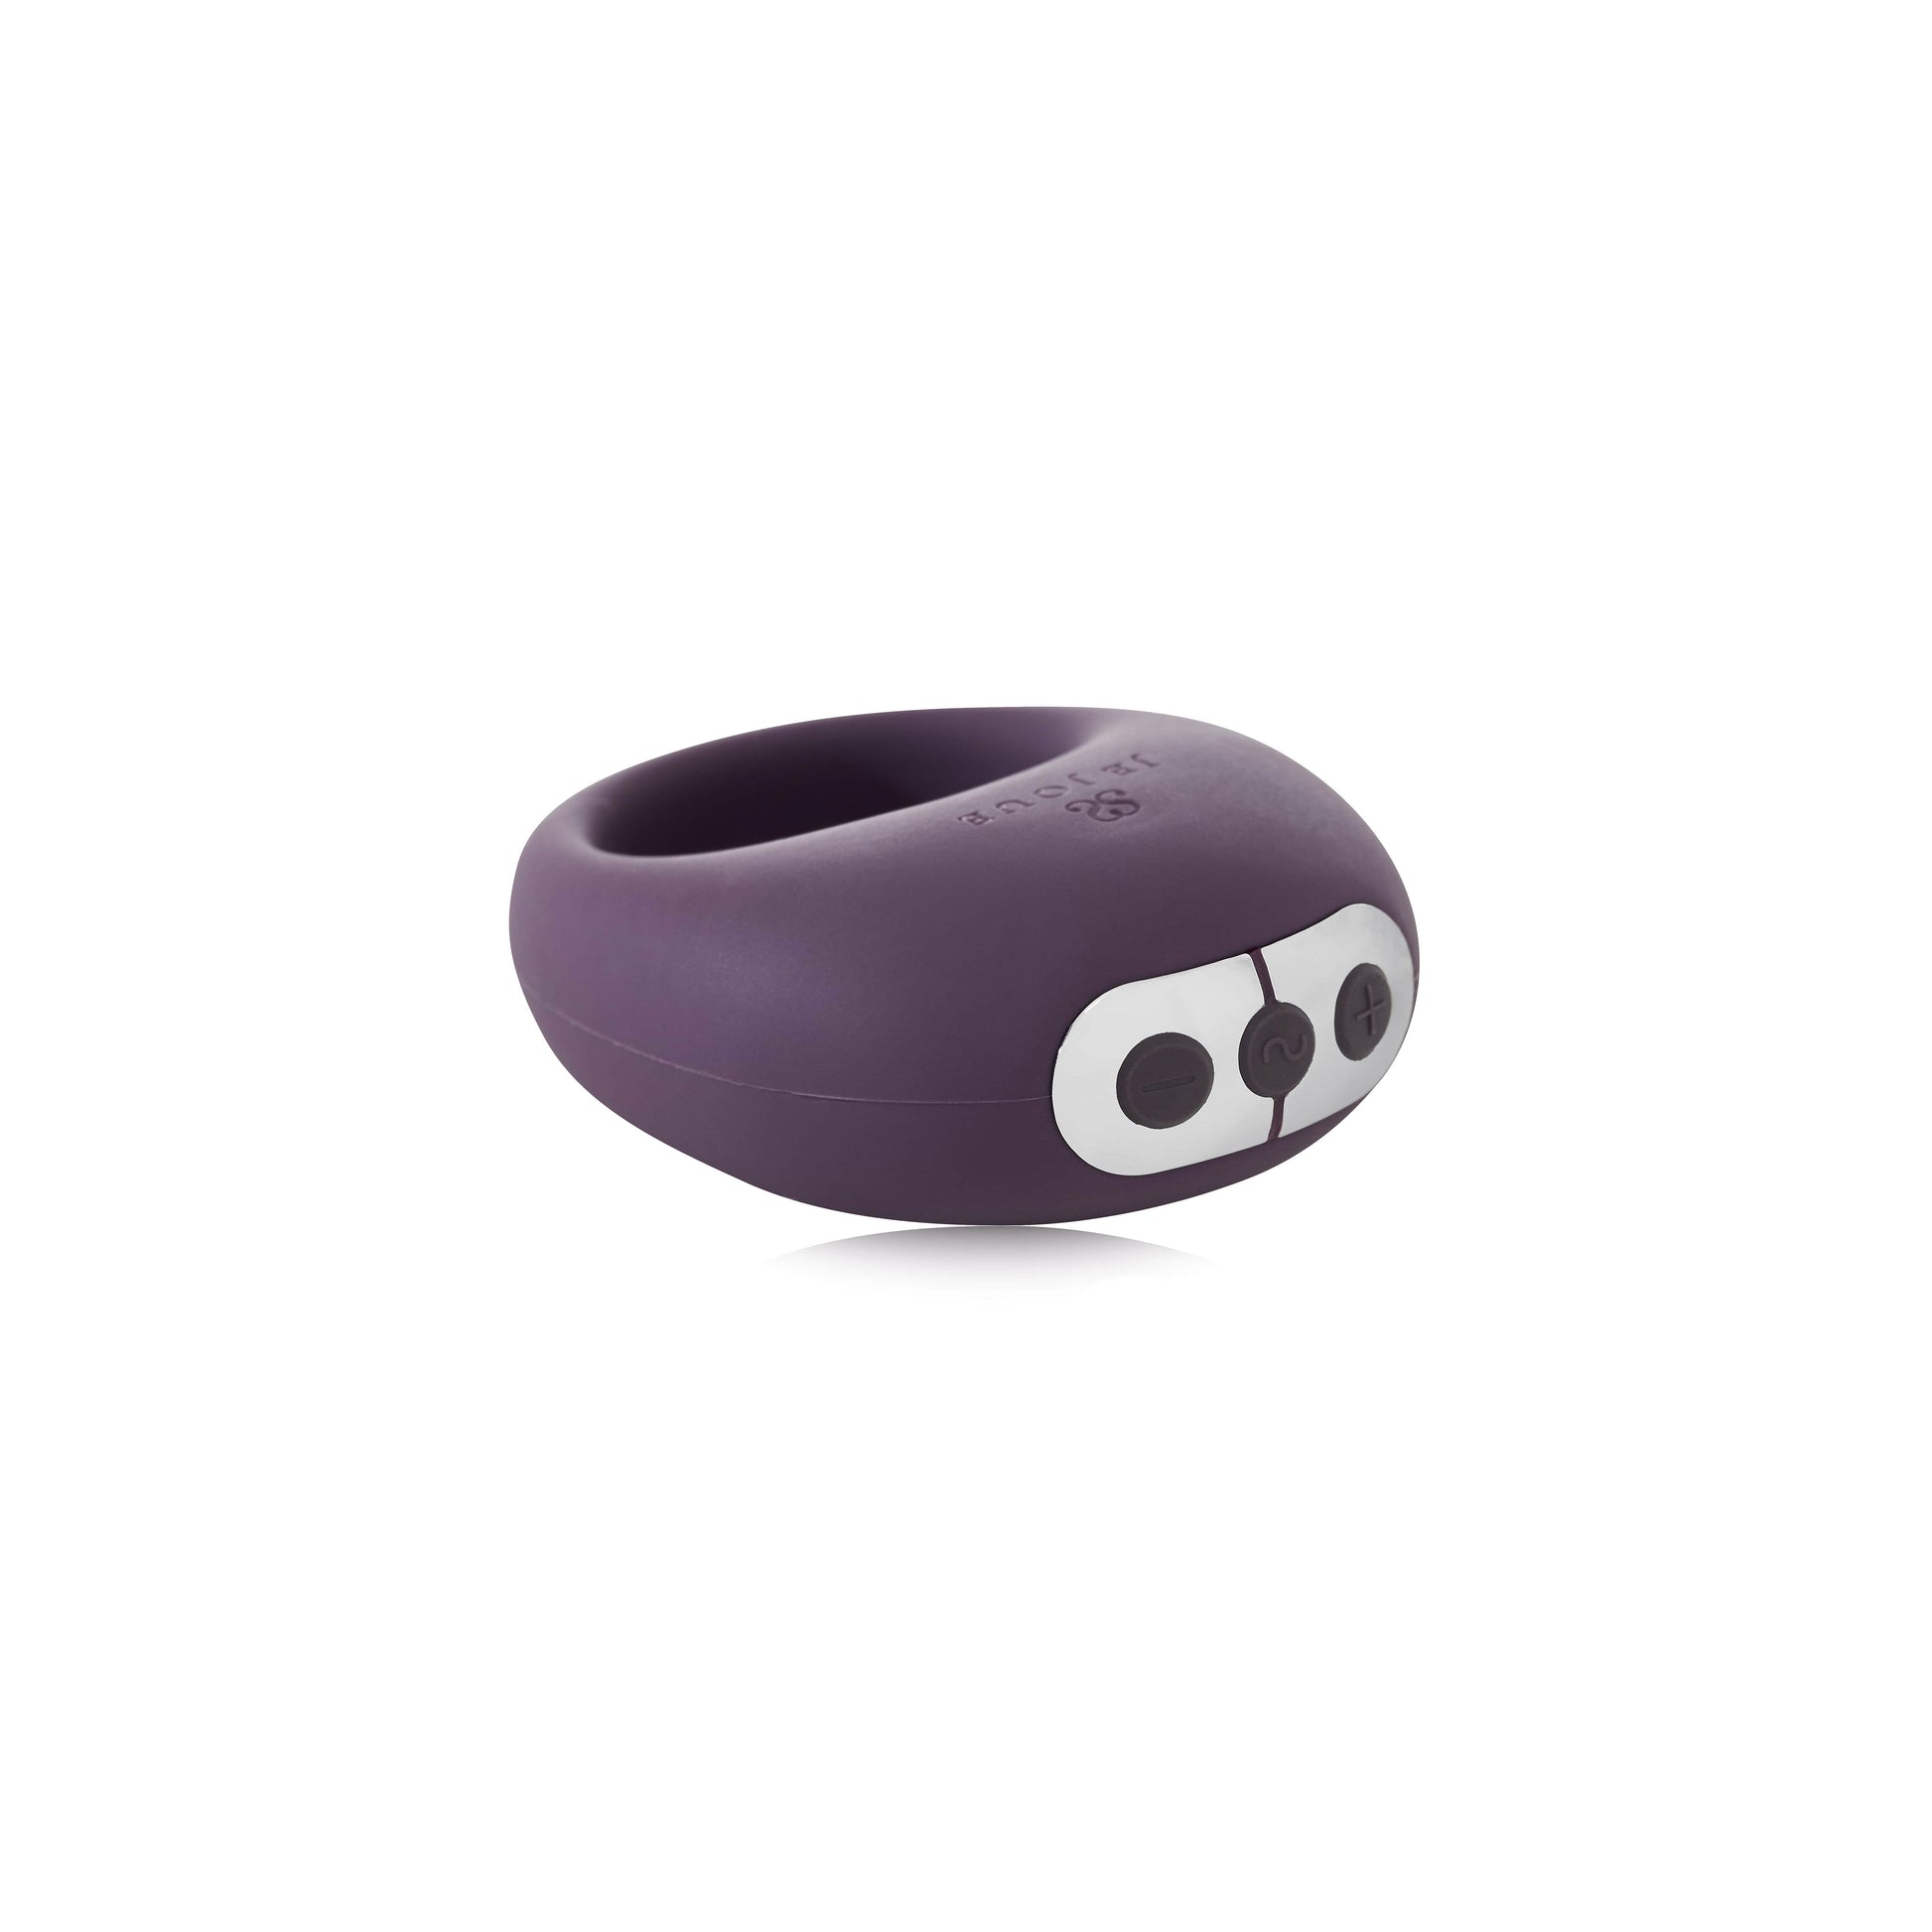 Mio cock ring in purple side view